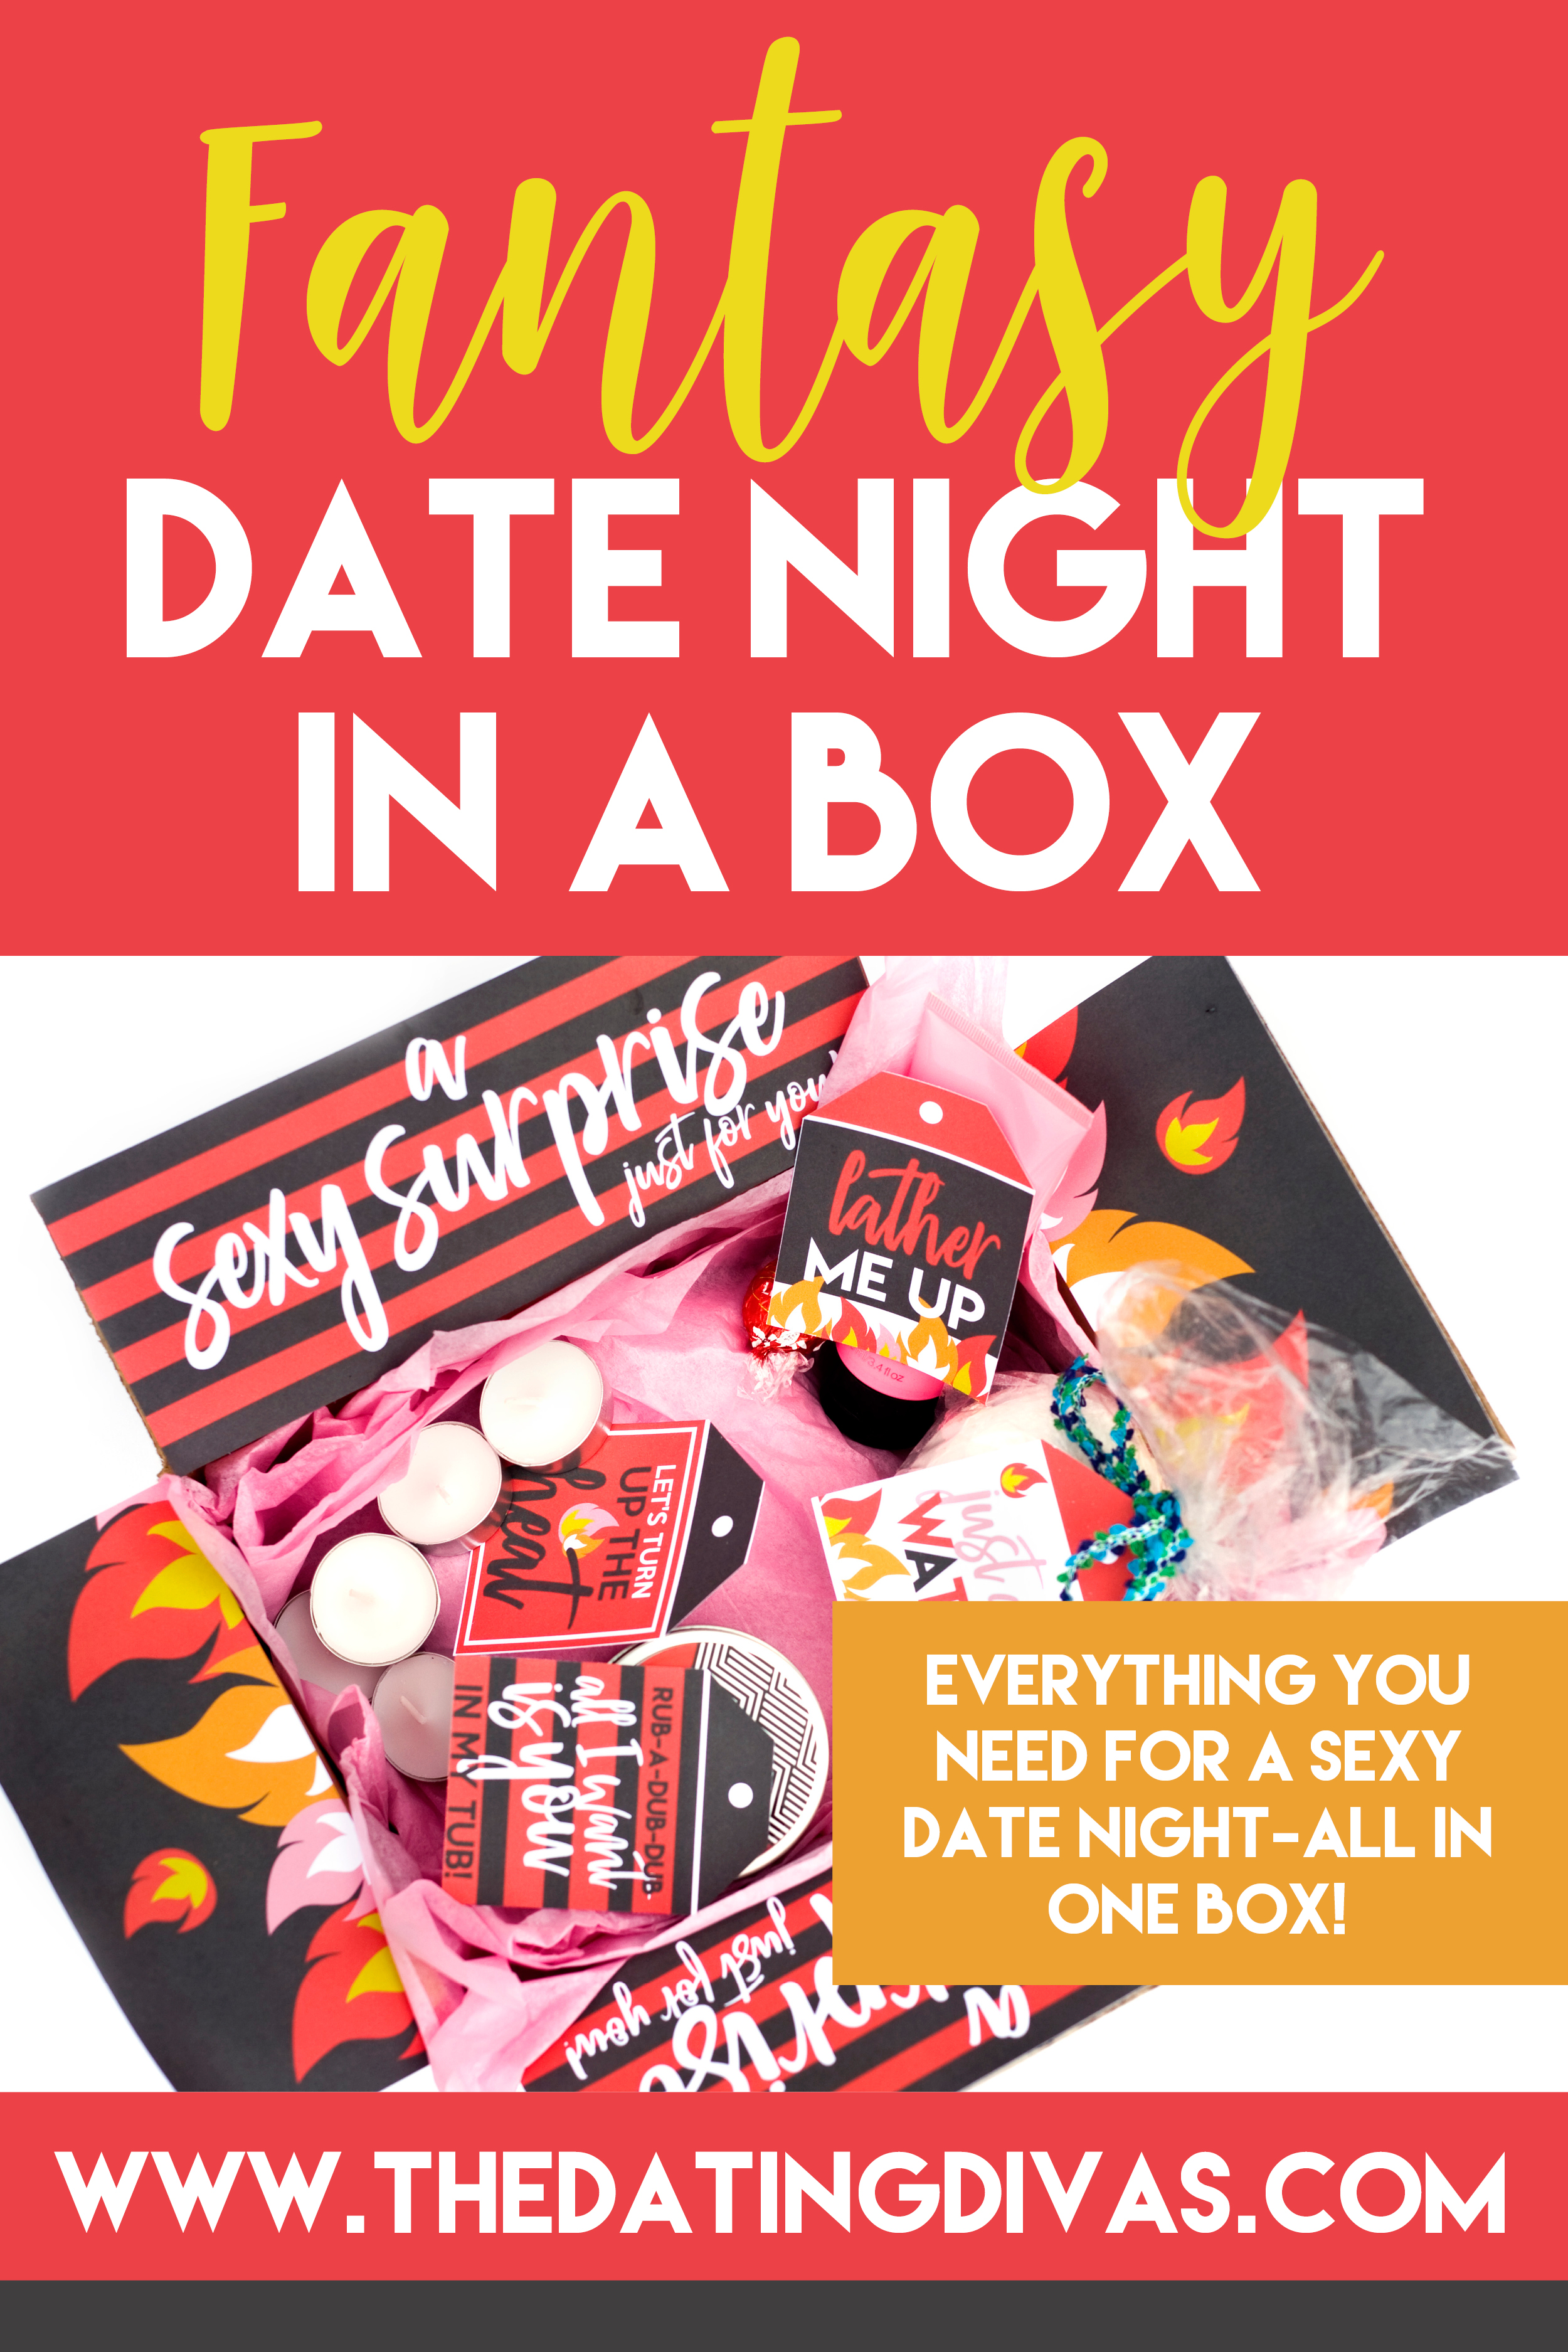 I'd love to make a sexy date night in a box a monthly tradition! Kind of like a DIY adult subscription box. #datenightin #datenightinabox #sexydatenightideas